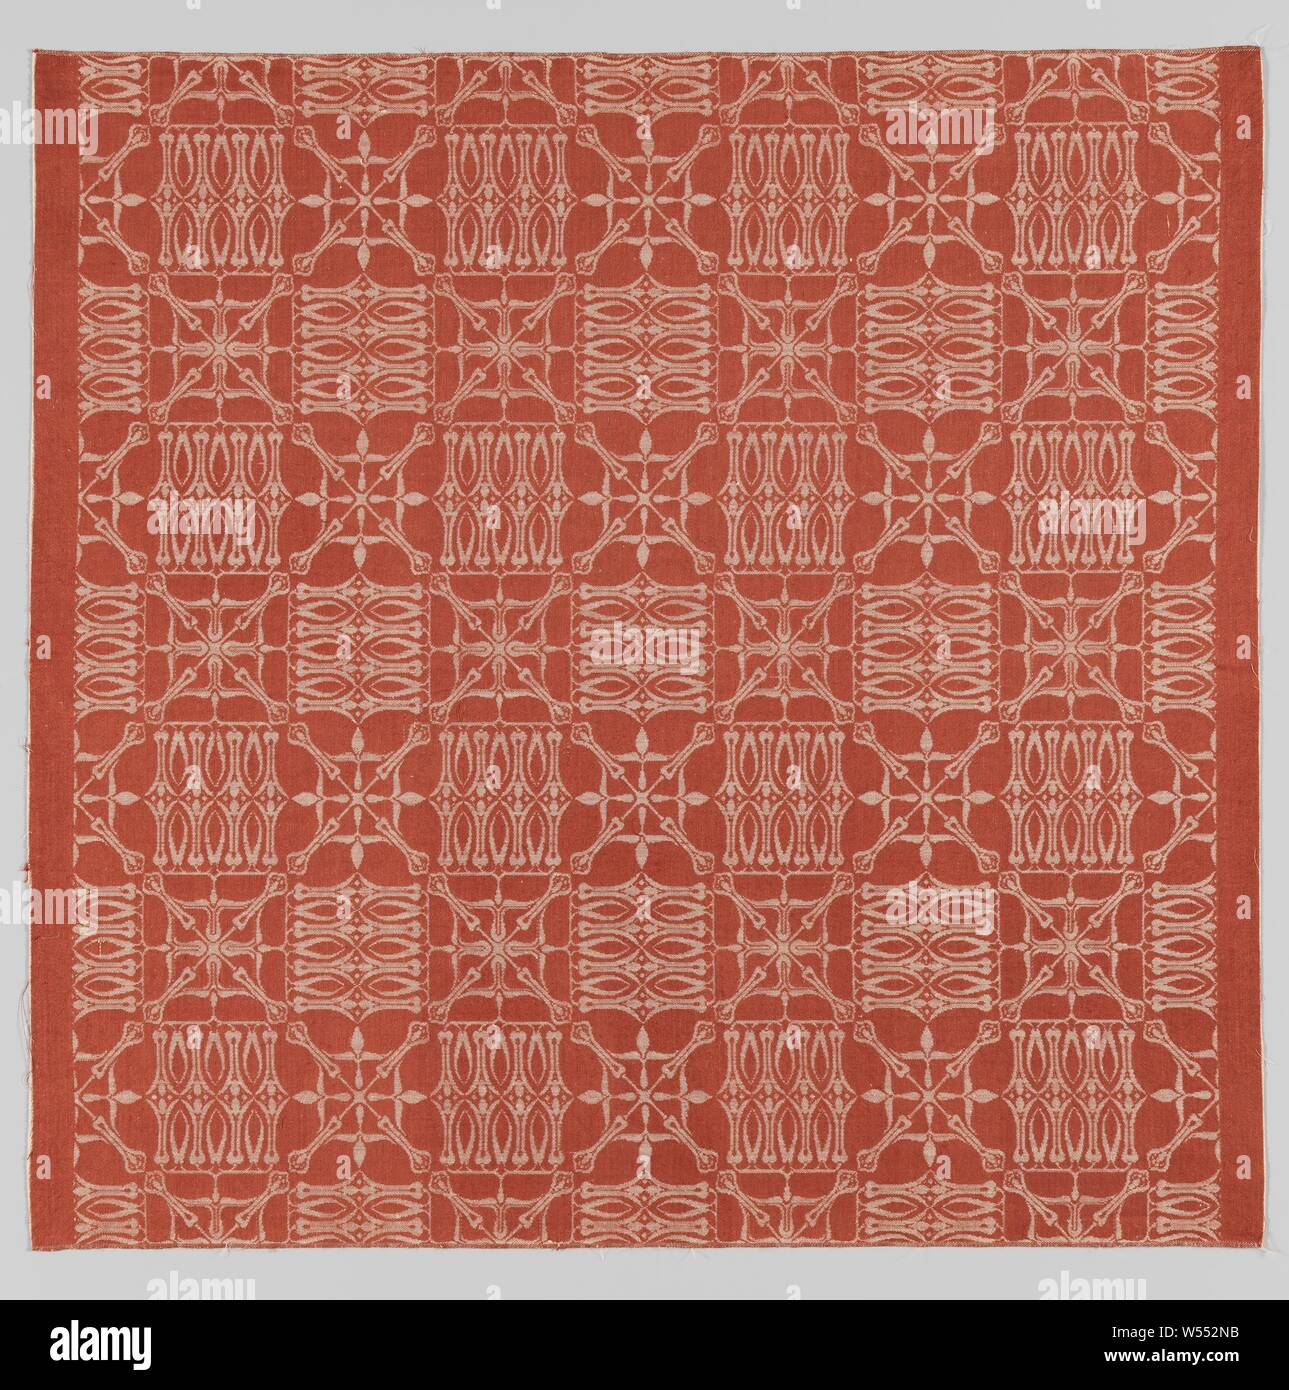 Steel fabric of linen damask with diamond and block pattern, Steel fabric of linen damask with stylized diamond and block pattern in natural on a red ground., Chris Lebeau, Eindhoven, 1911 - 1915, linen (material), damask, h 57.0 cm × w 59.5 cm Stock Photo